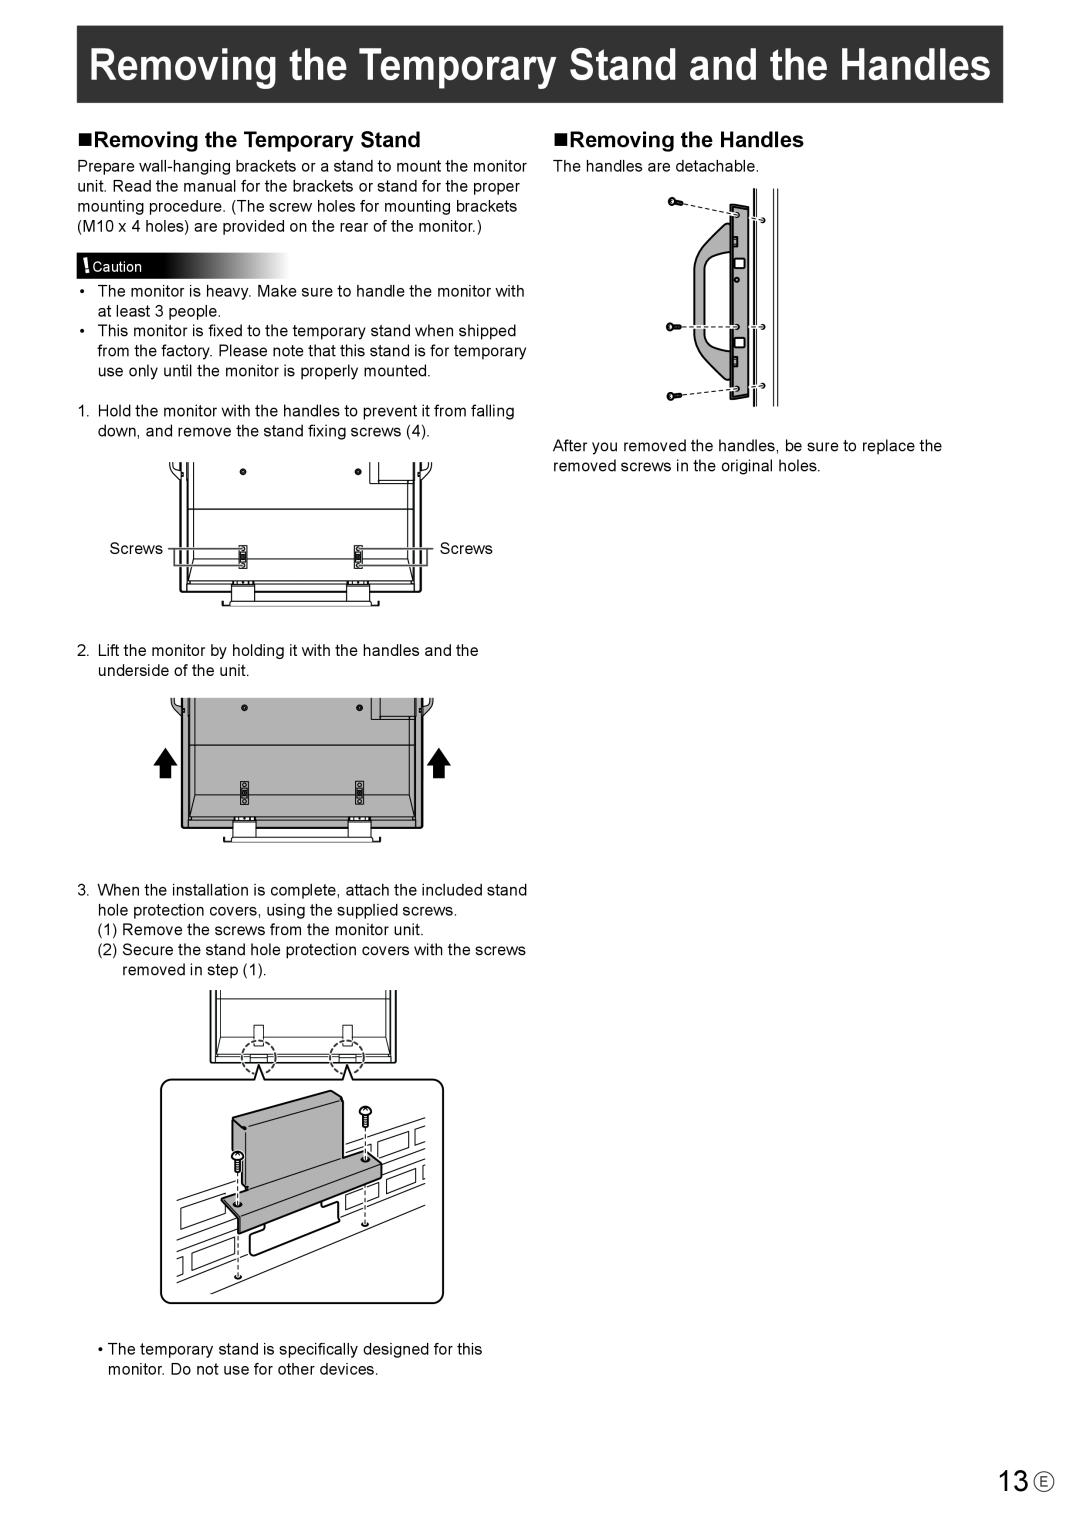 Mitsubishi Electronics LDT651P operation manual 13 E, nRemoving the Temporary Stand, nRemoving the Handles 